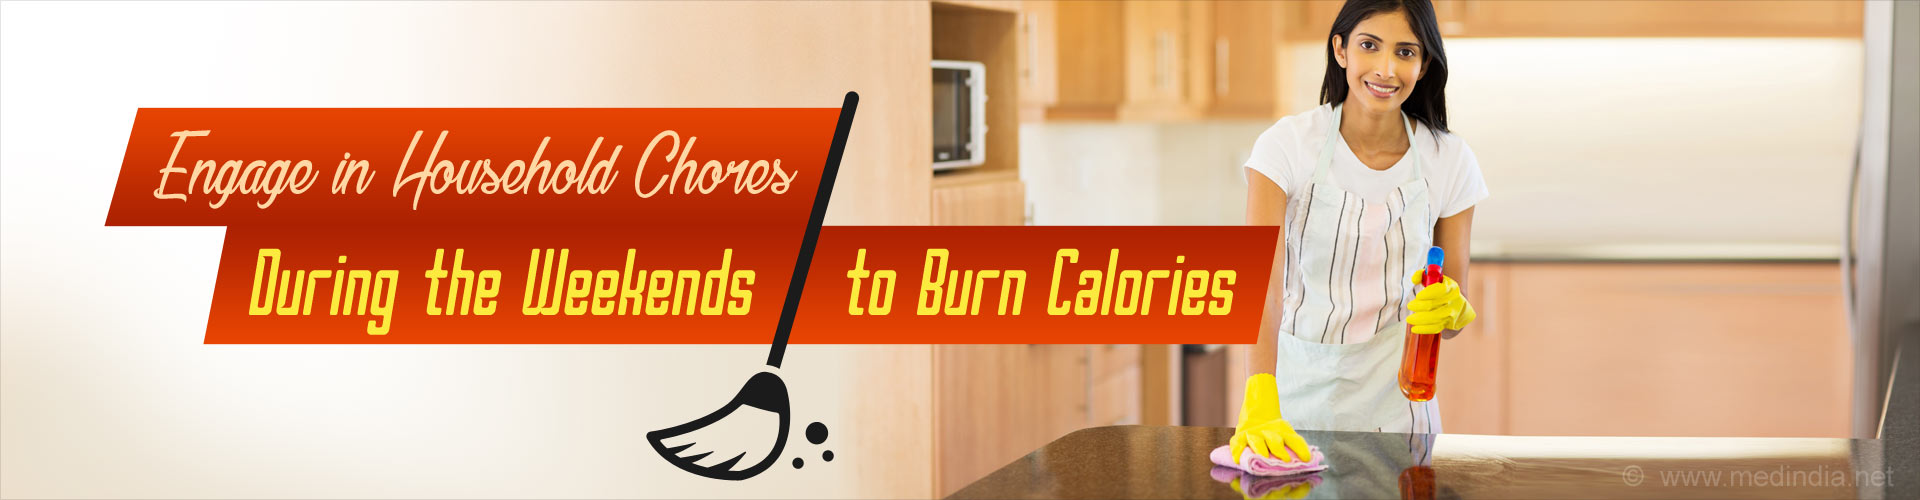 Engage in Household Chores During the Weekends to Burn Calories